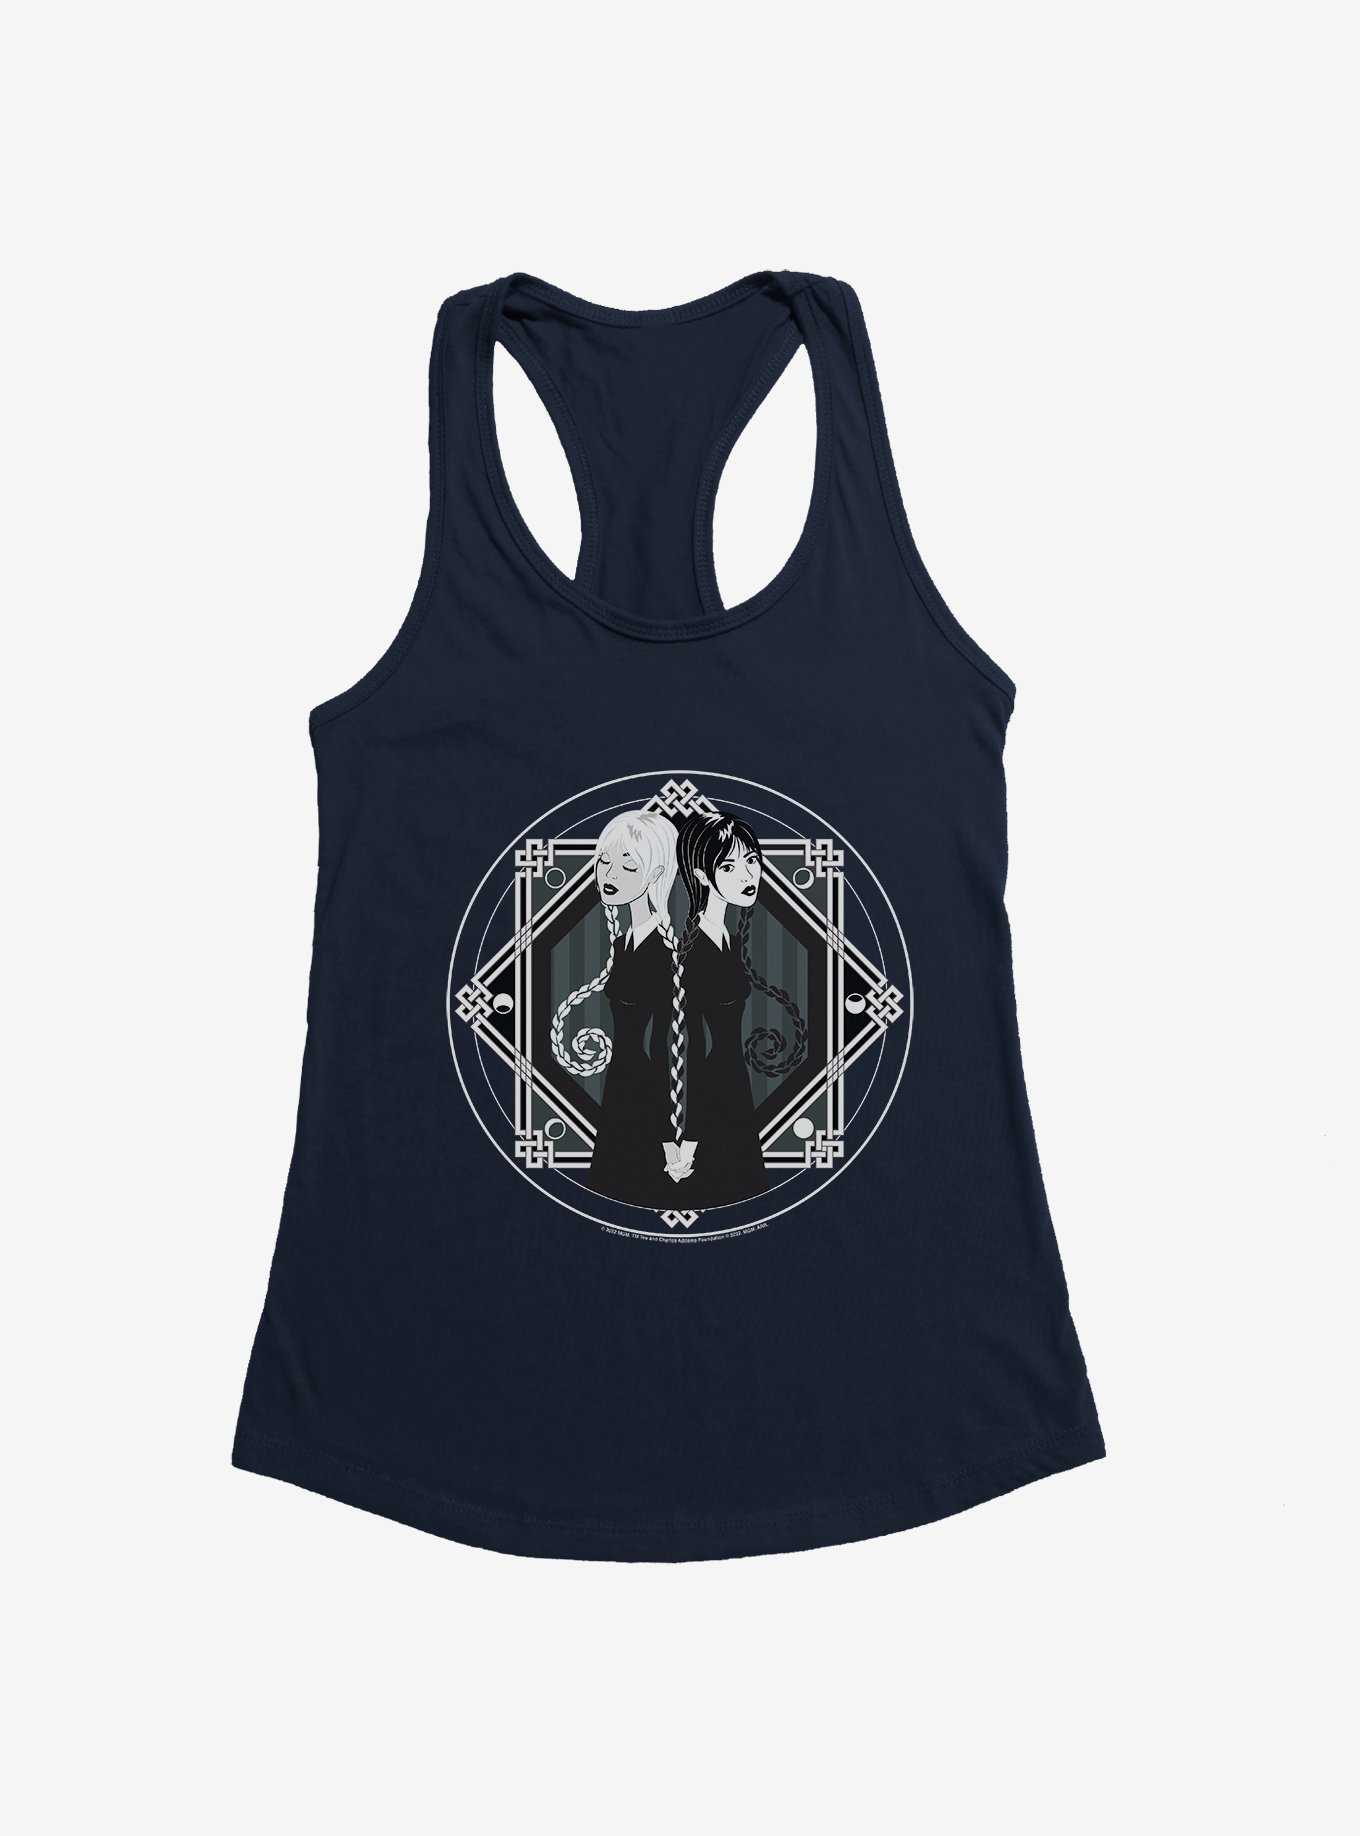 Wednesday TV Series Goody And Wednesday Addams Girls Tank, , hi-res